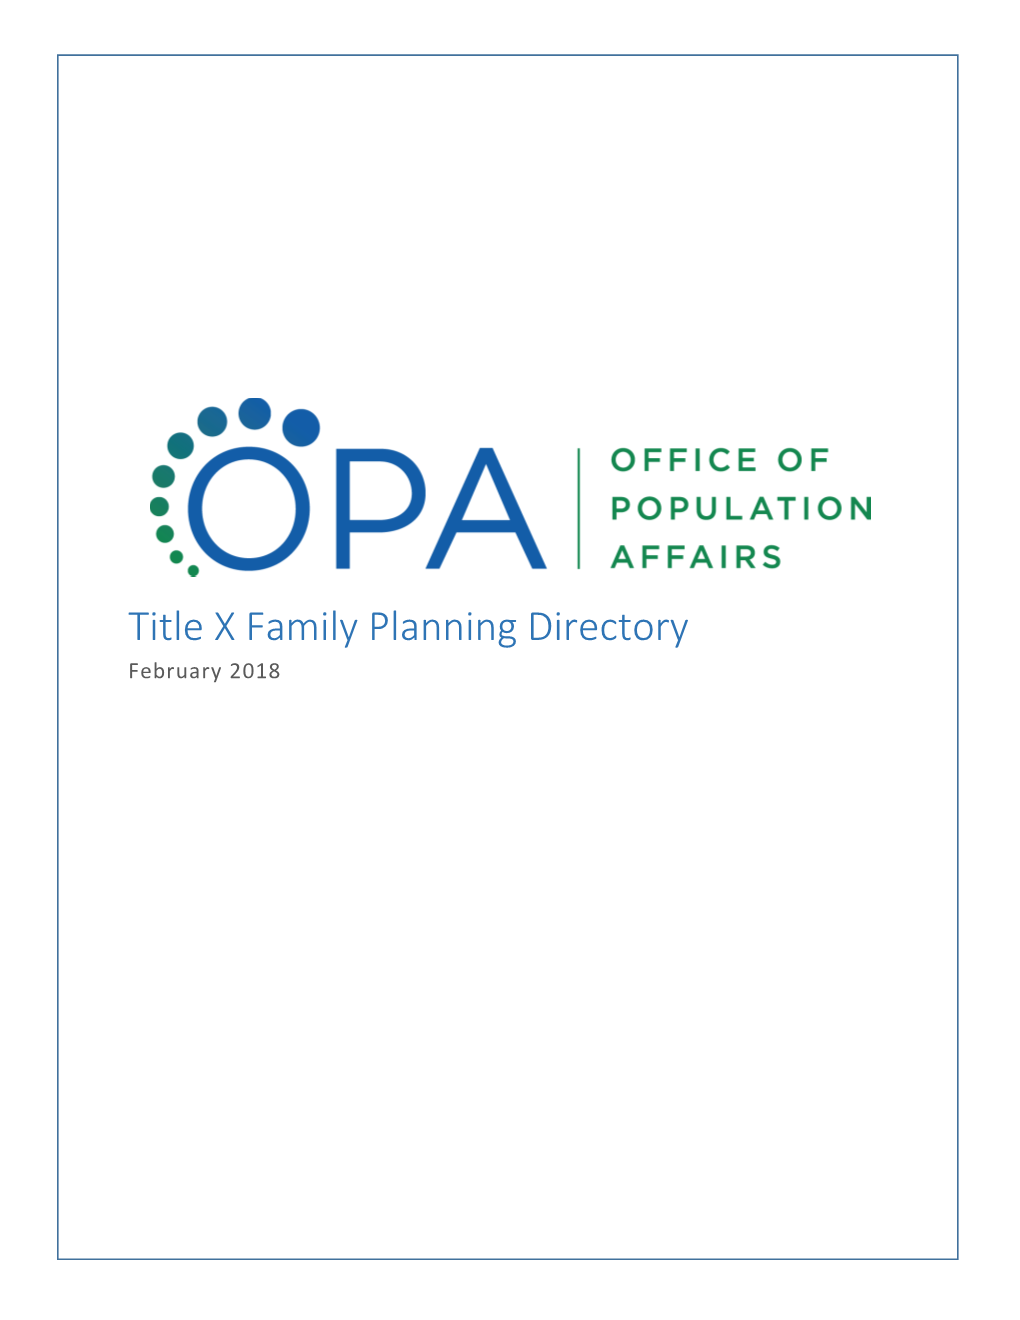 Title X Family Planning Directory of Grantees